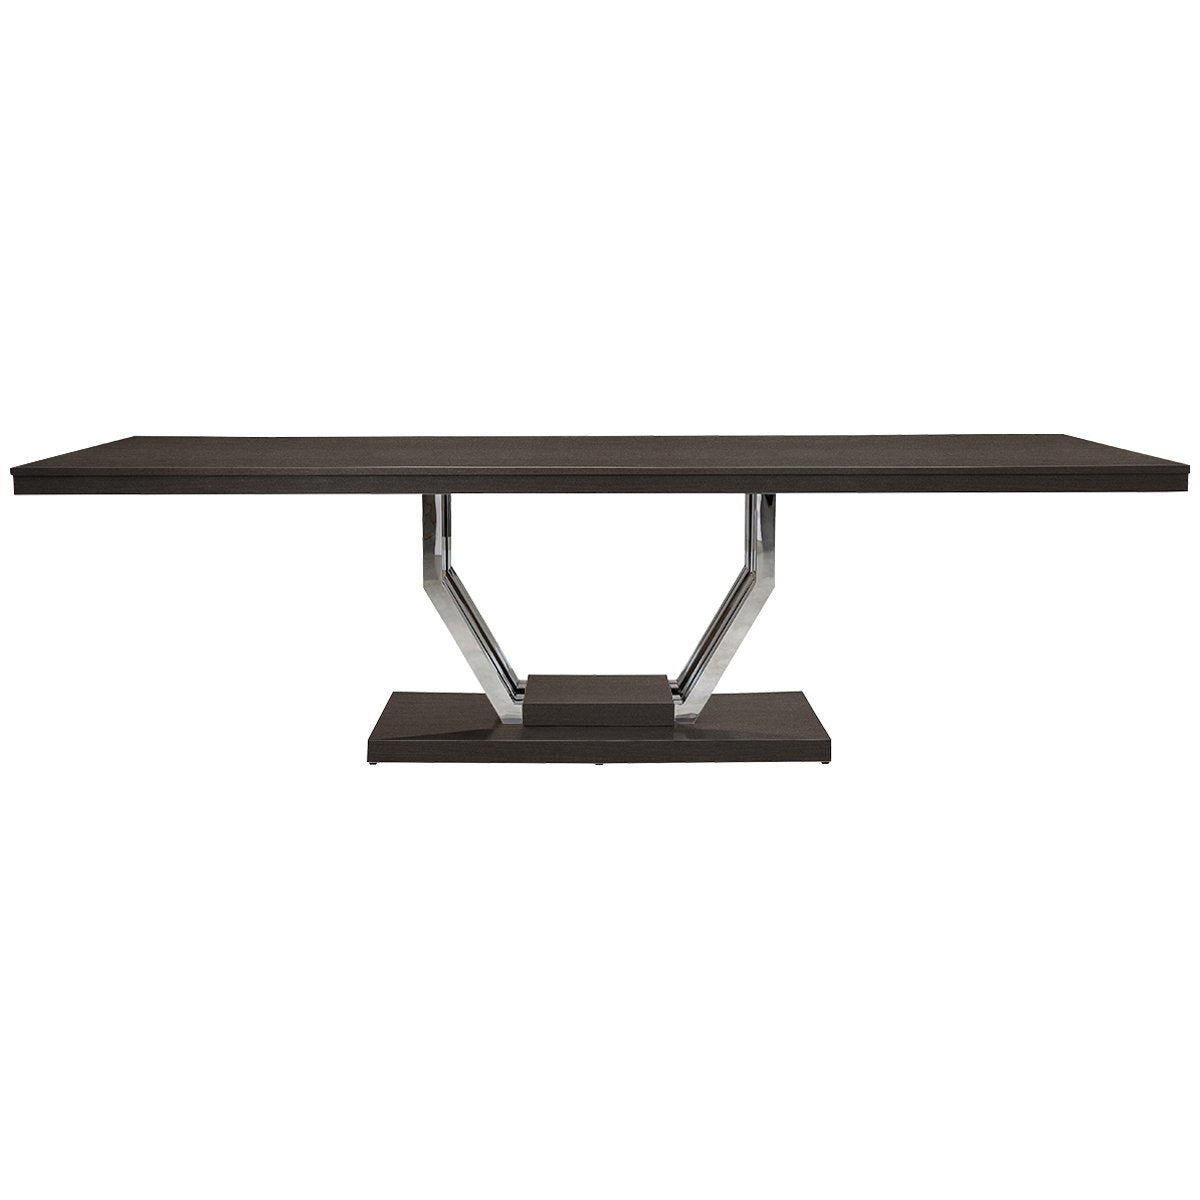 Belle Meade Signature Silas Dining Table